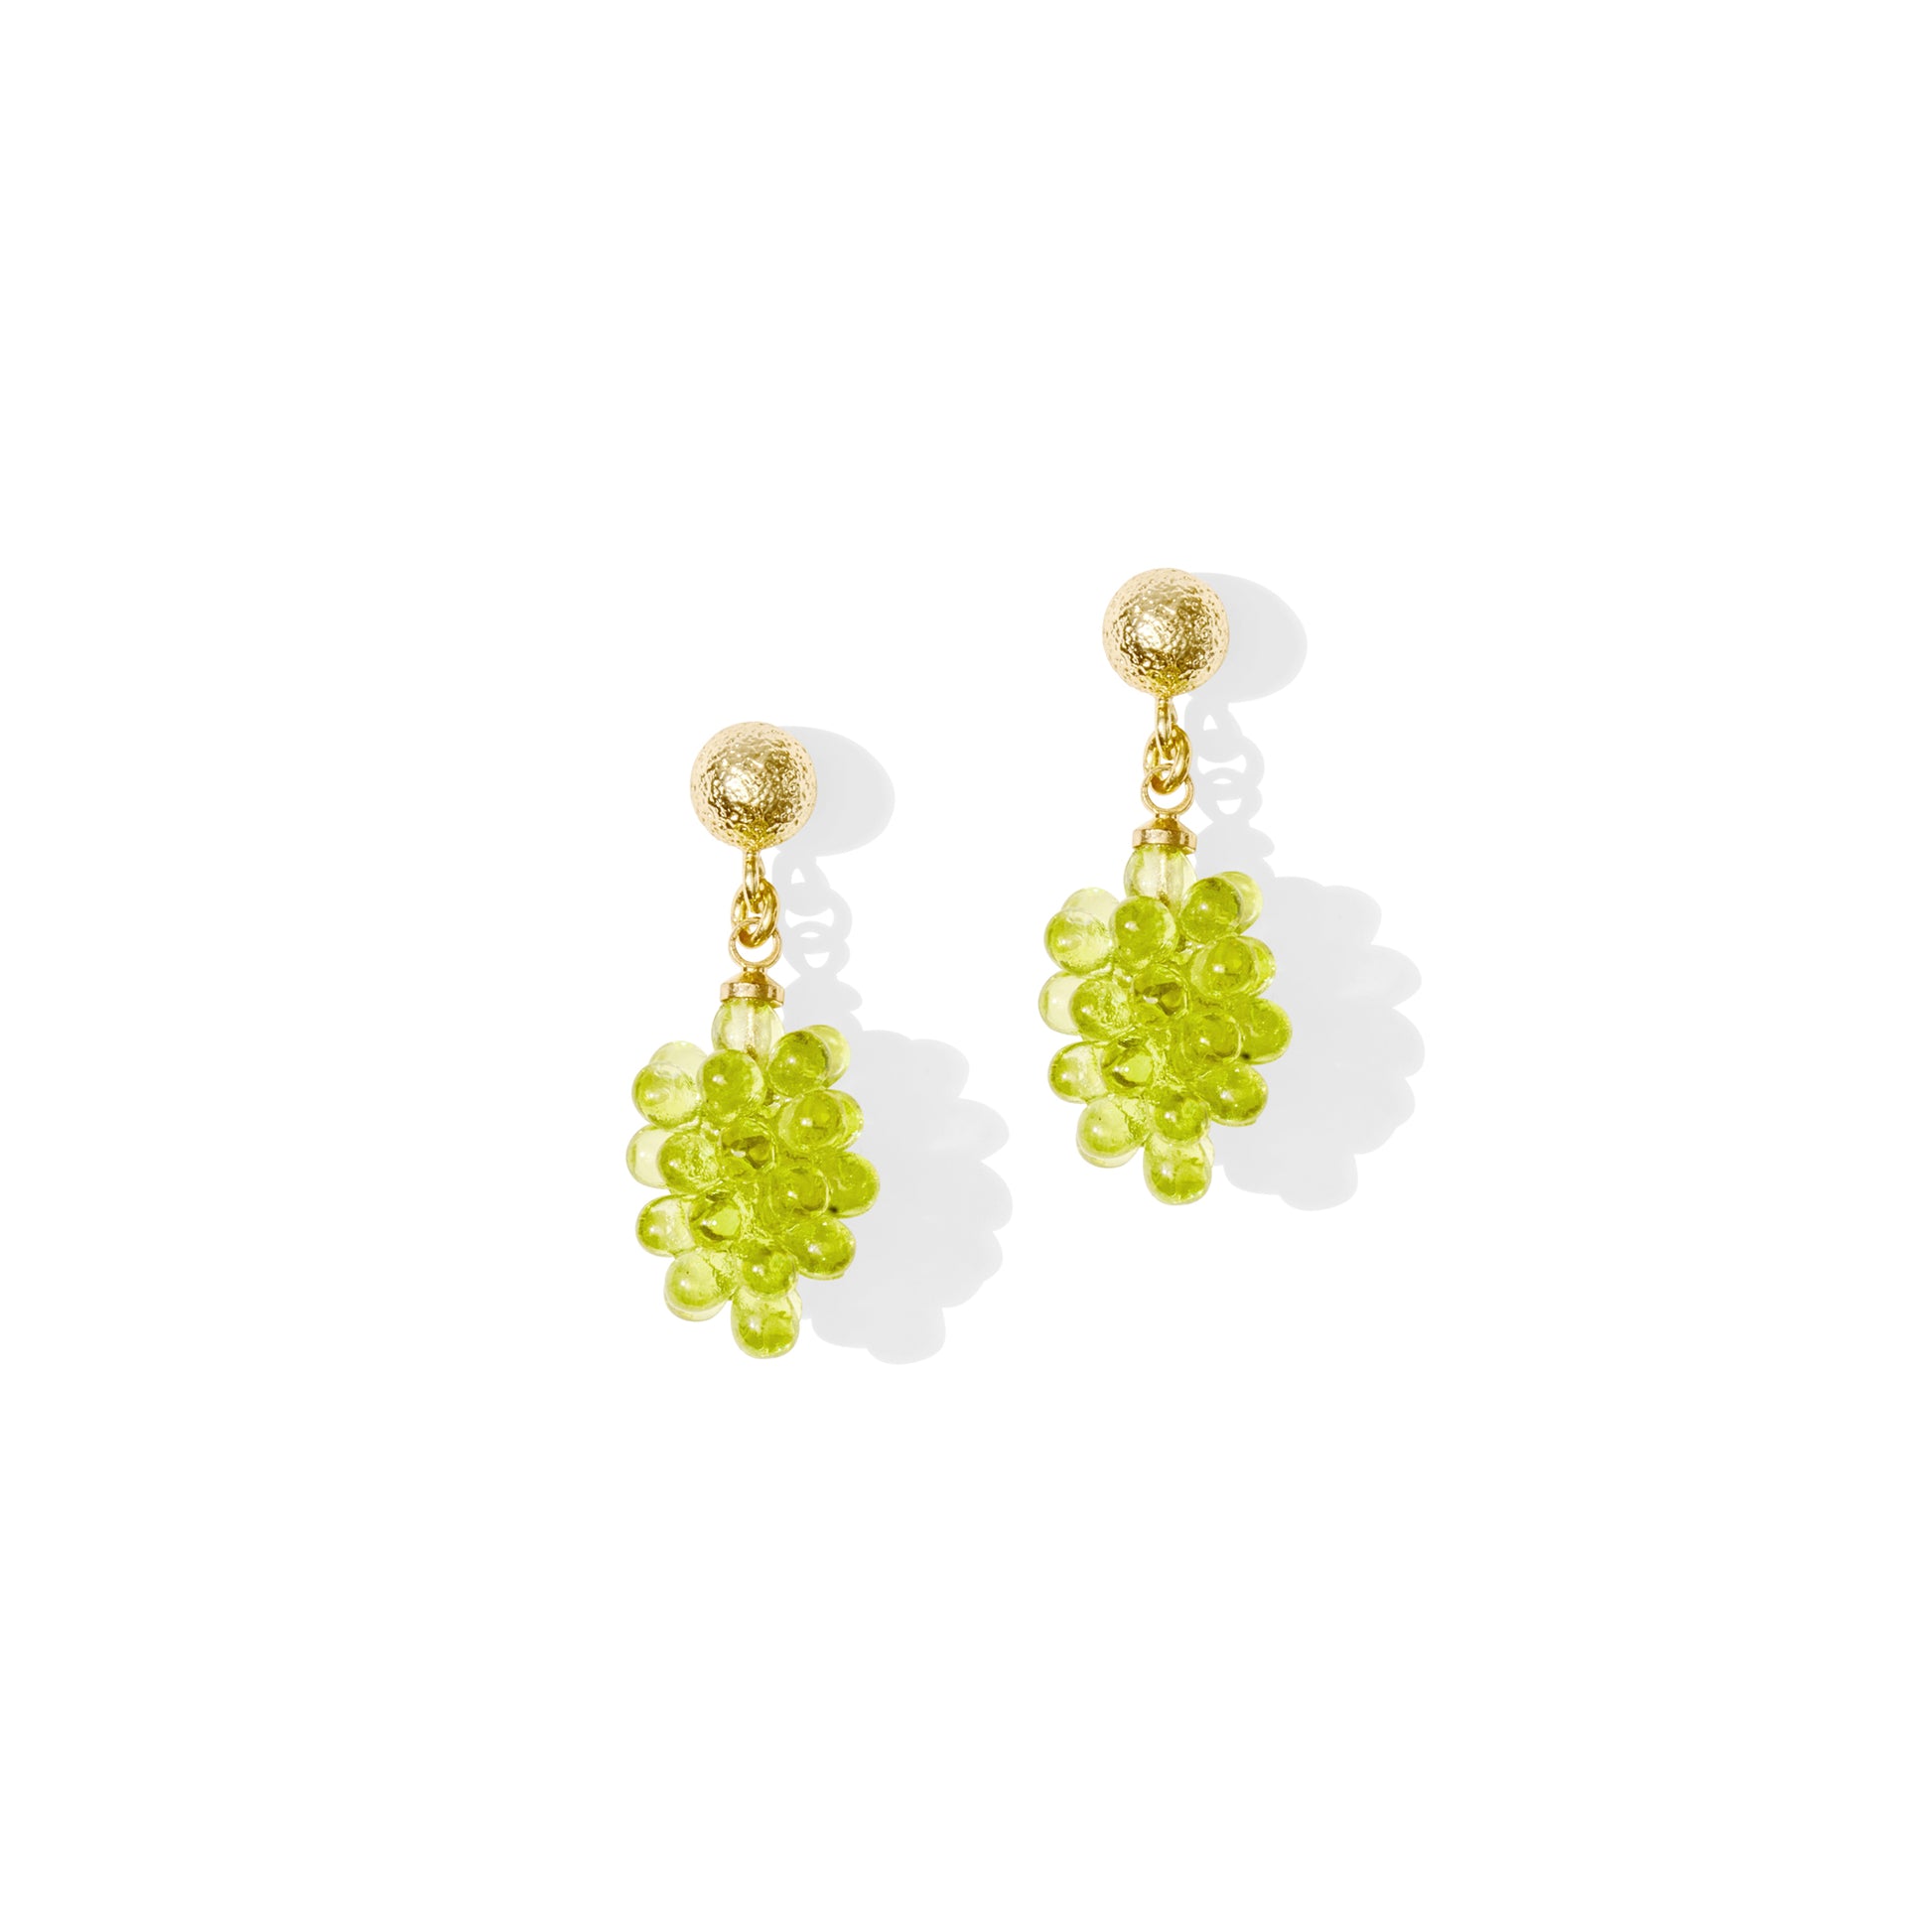 Mini Green Grapes Dangle Earrings - Lusanet Collective